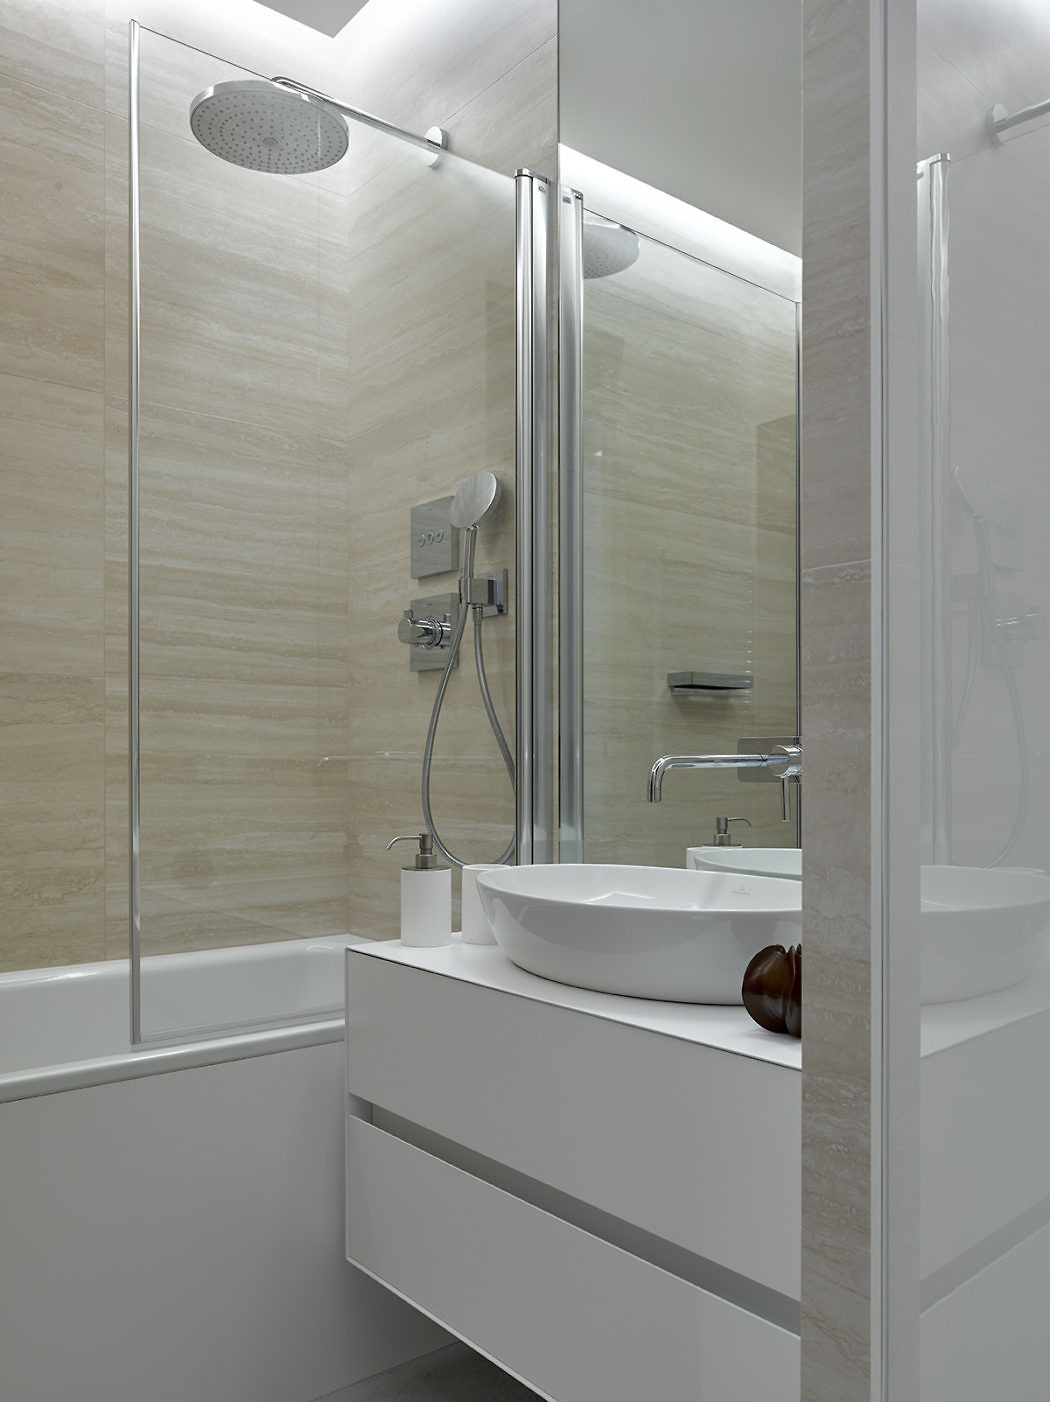 Modern bathroom with beige tiles, glass shower, and white vanity.